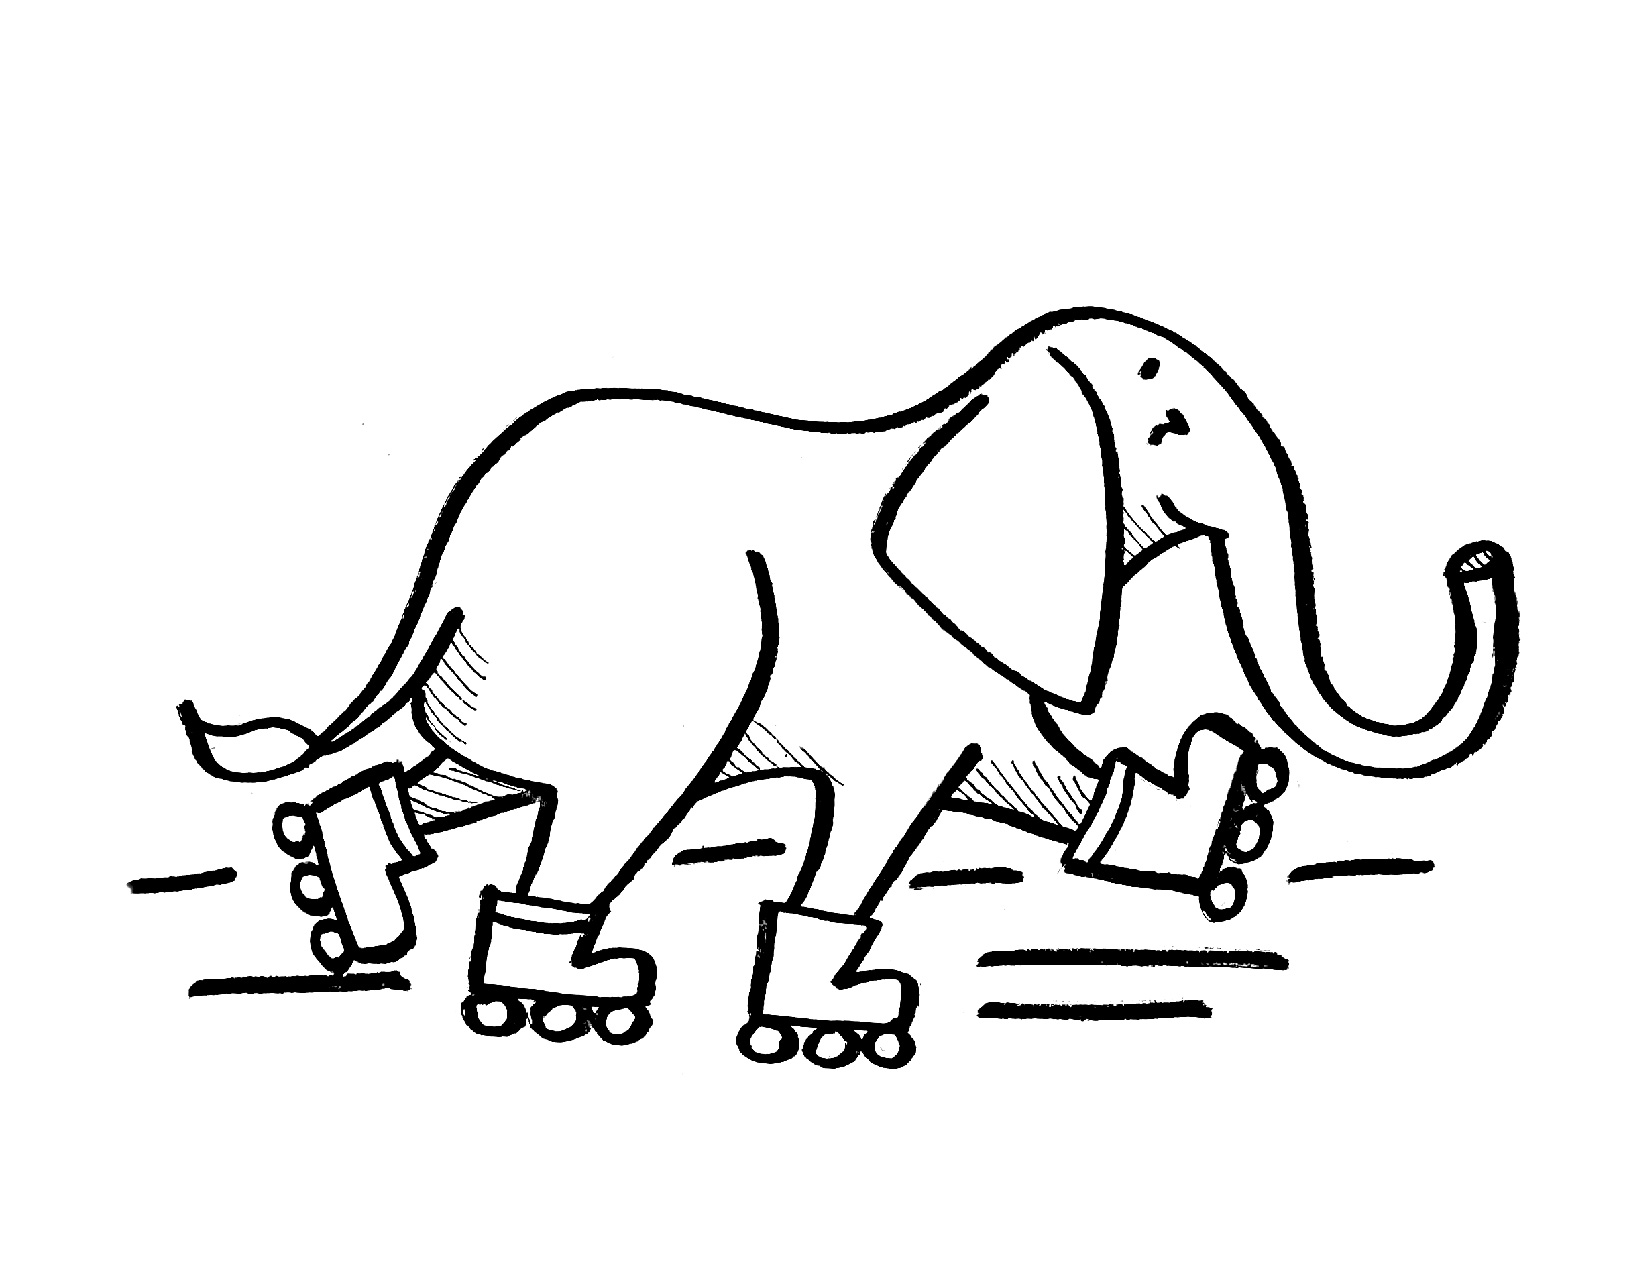 Coloring Page from The Little Book of Creativity elephant on roller-skates